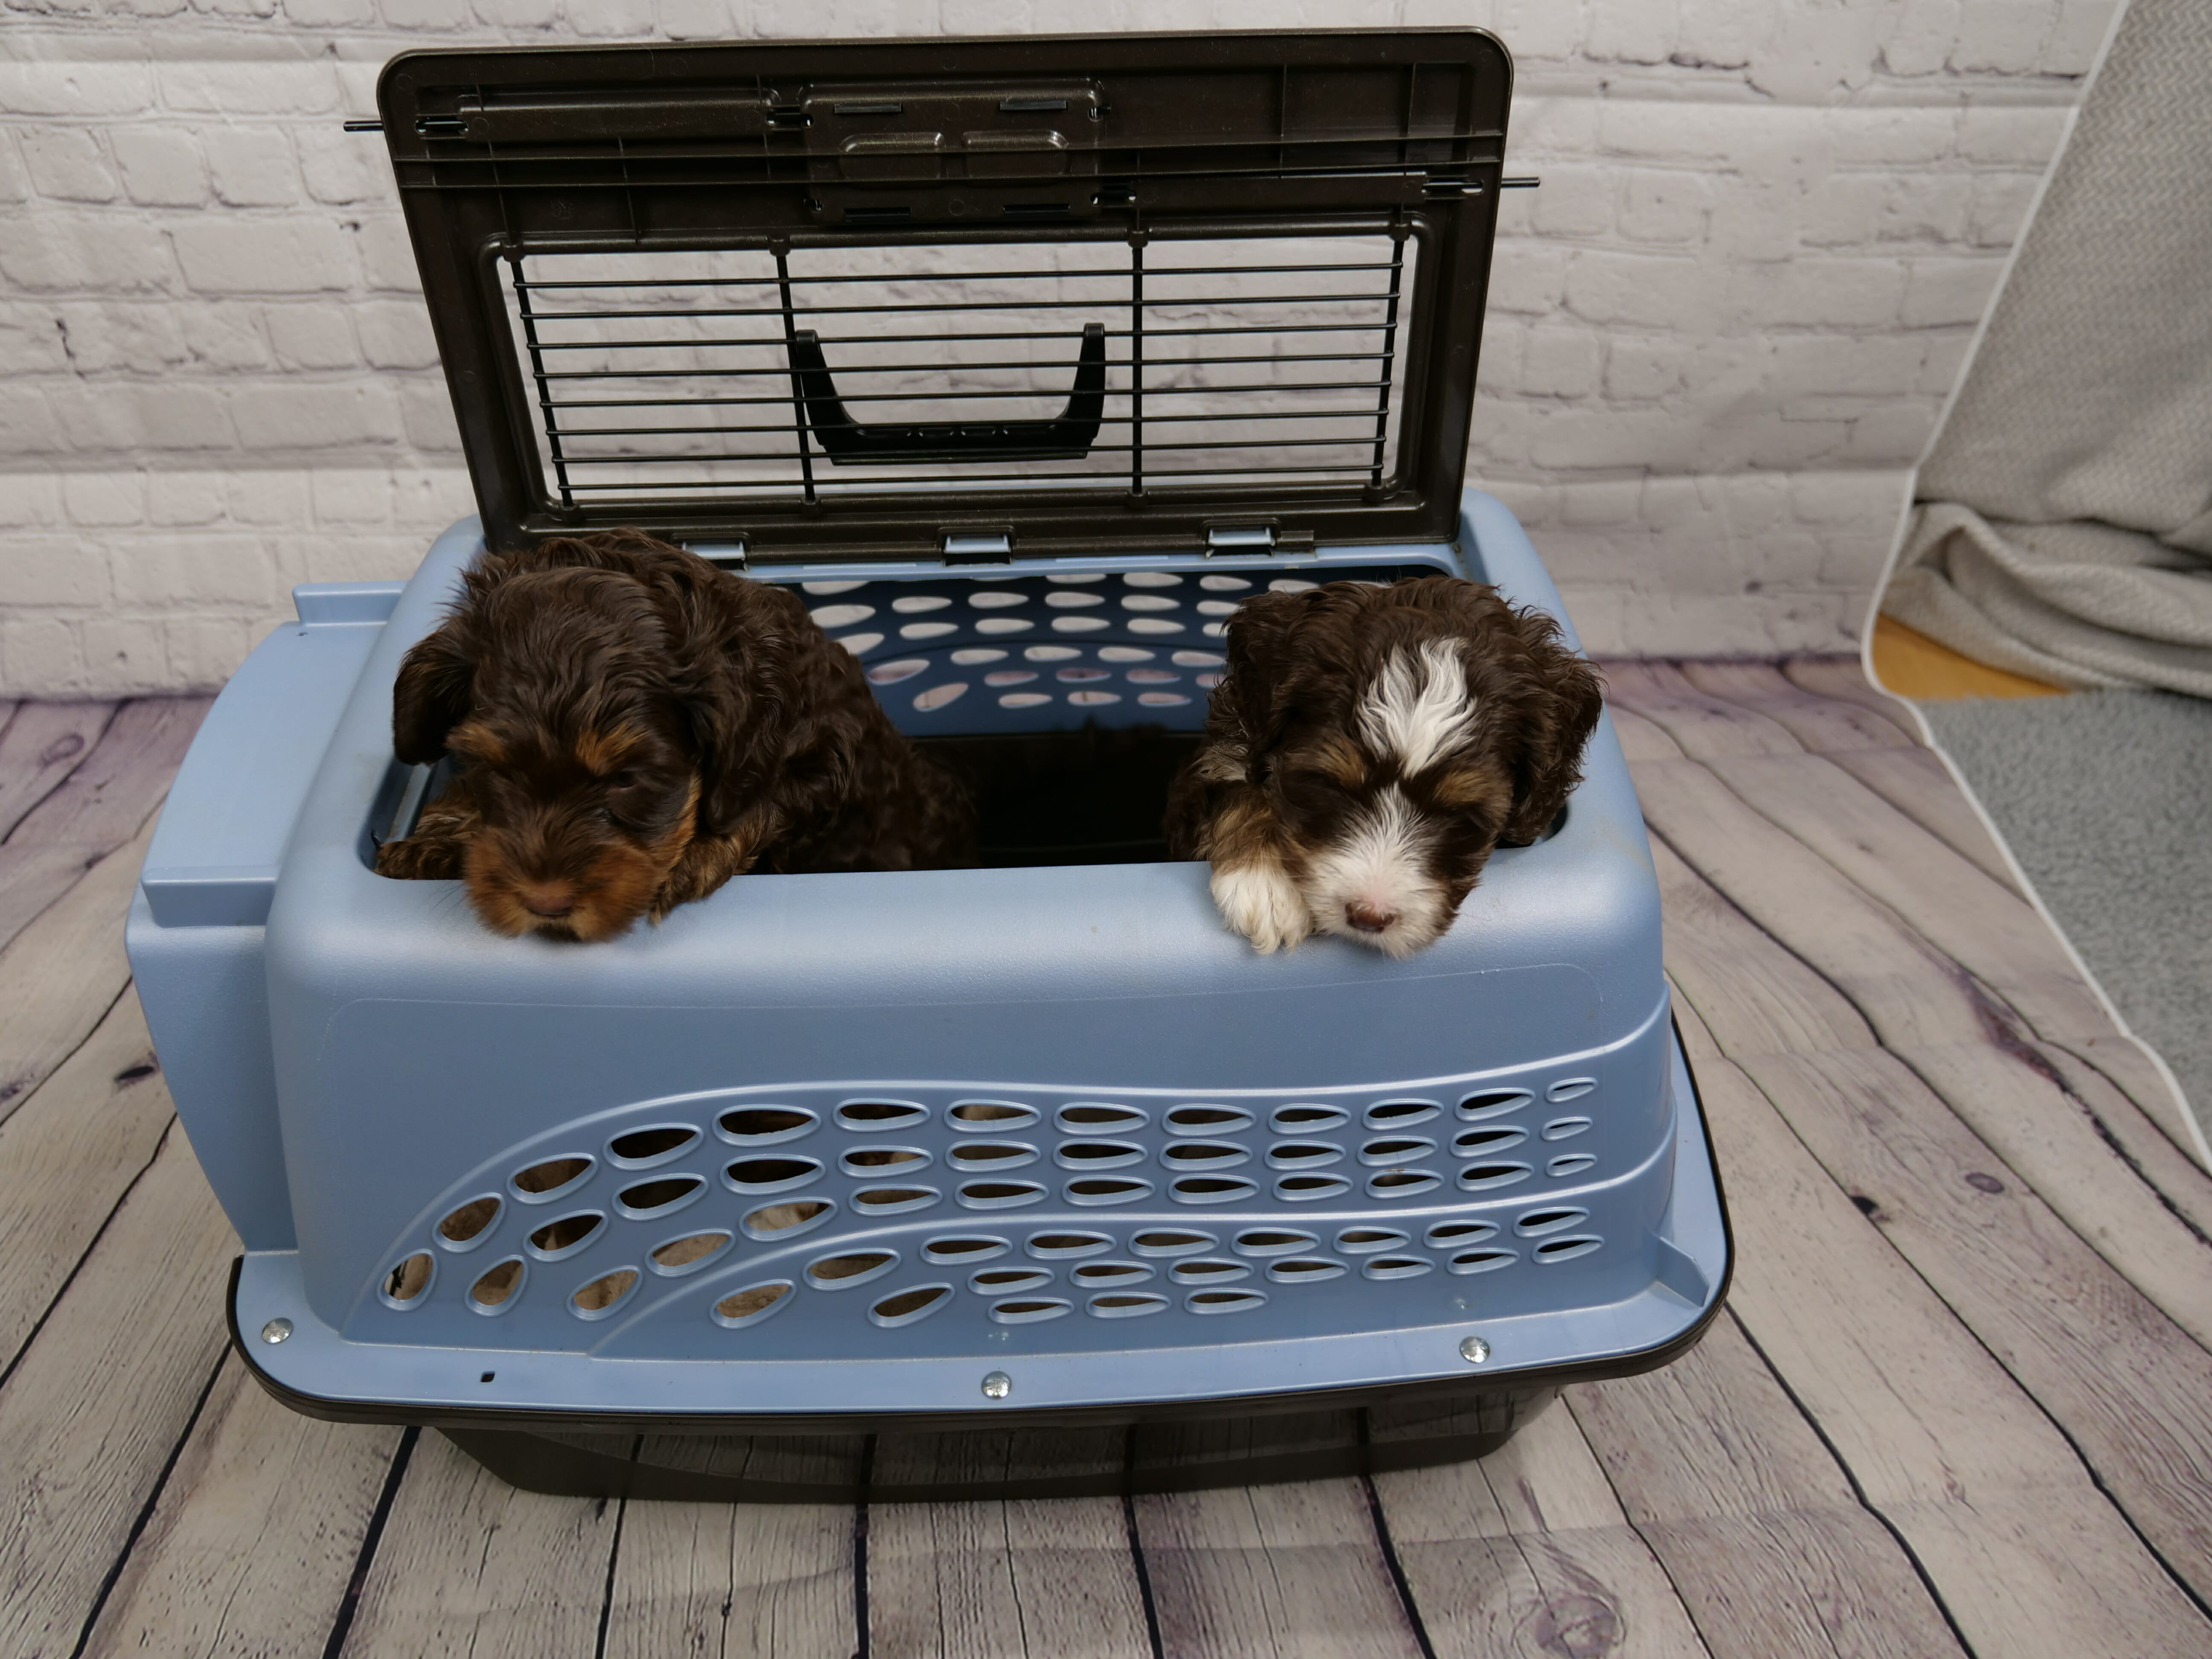 two 5-week old chocolate phantom labradoodle puppies poking their heads out the top of a blue kennel. Puppy on the right has white on the top of their head and nose with a white paw resting on the top of the kennel. Puppy on the left is dark chocolate with caramel tones. The lid of the kennel is opened and it is sitting outside on a wooden deck.